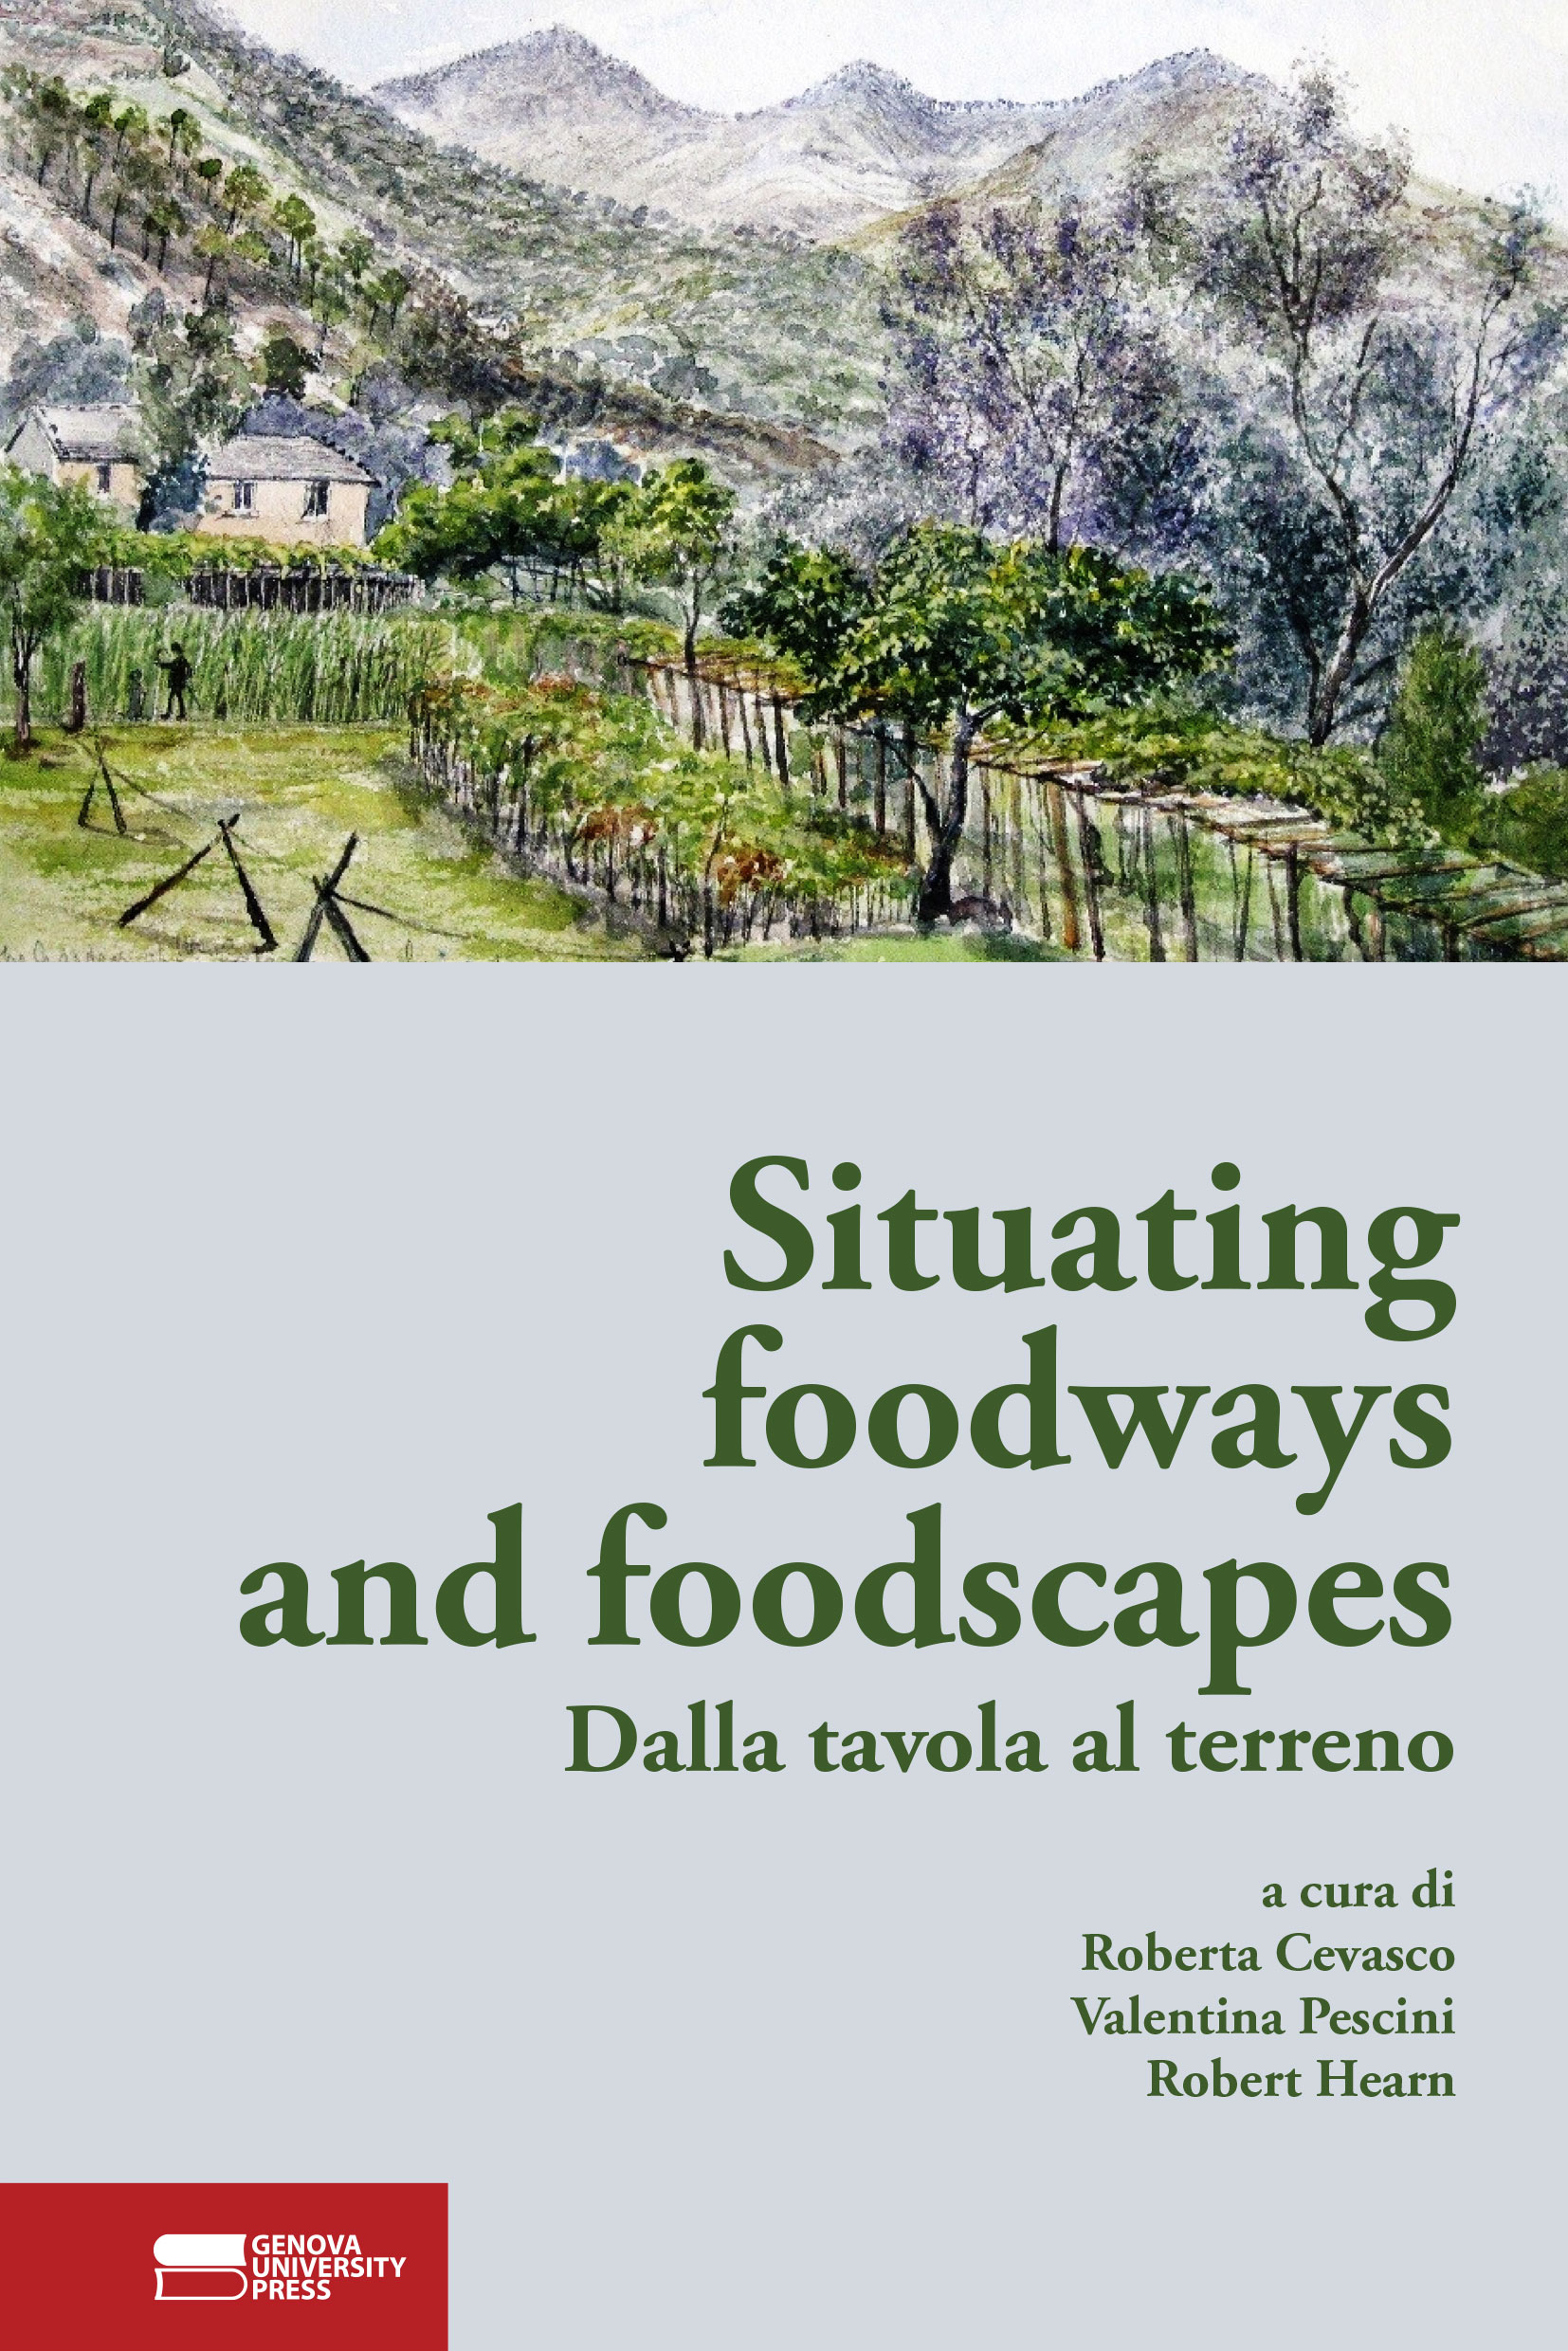 Situating foodways and foodscapes